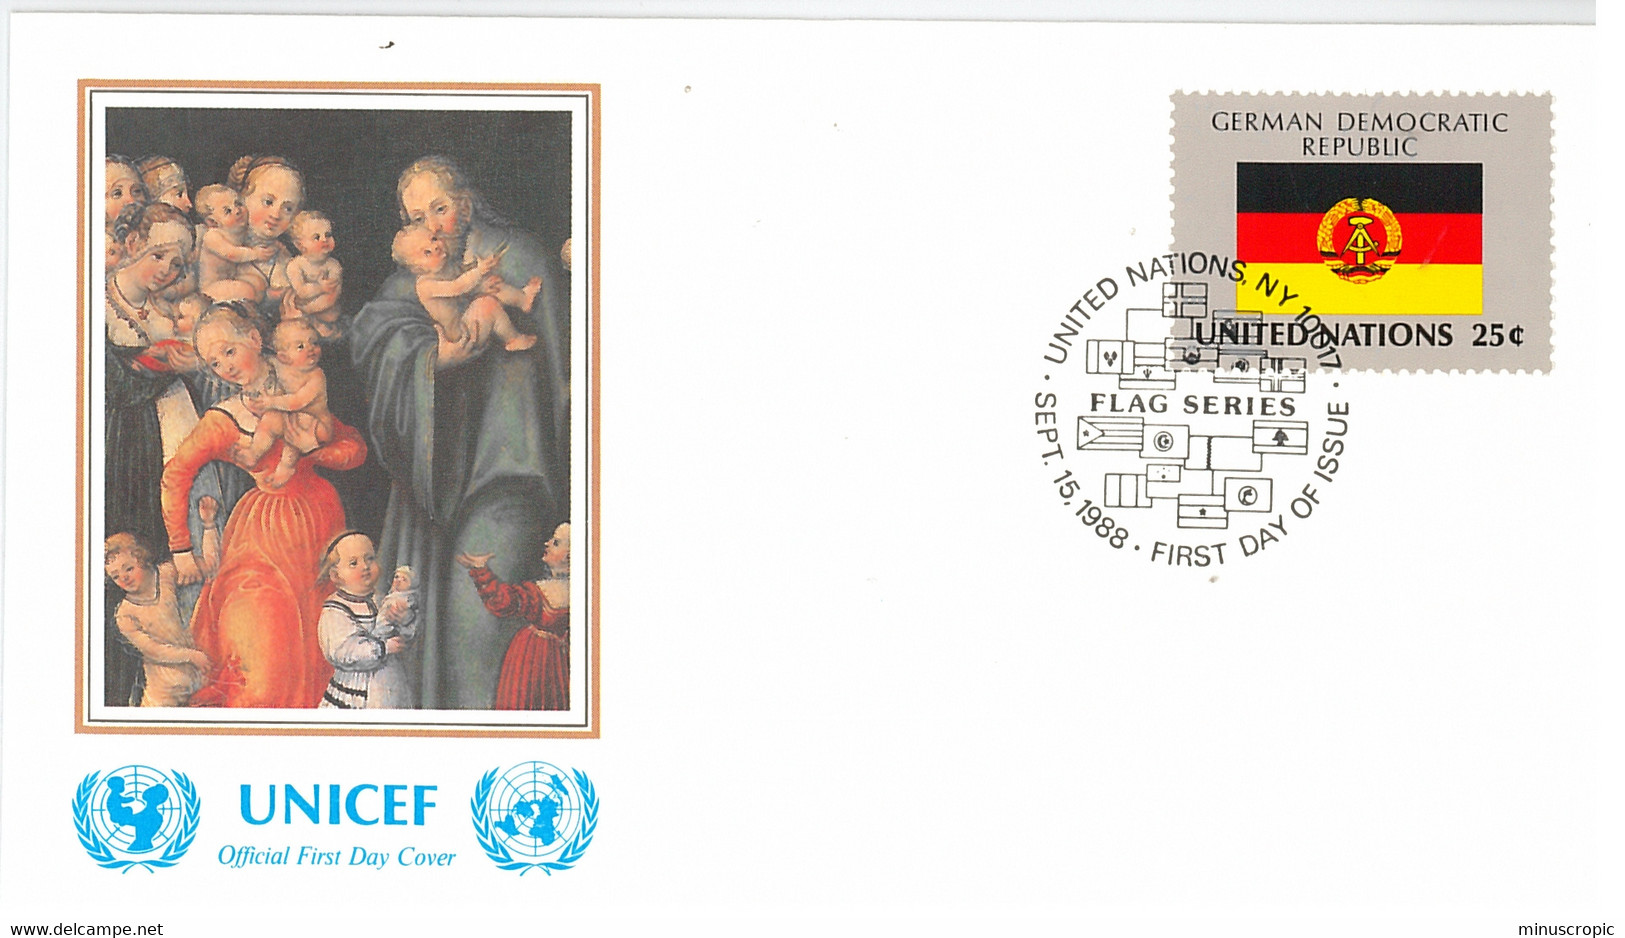 Enveloppe FDC United Nations - UNICEF - Flag Series 5/88 - German Democratic Republic - 1988 - Covers & Documents